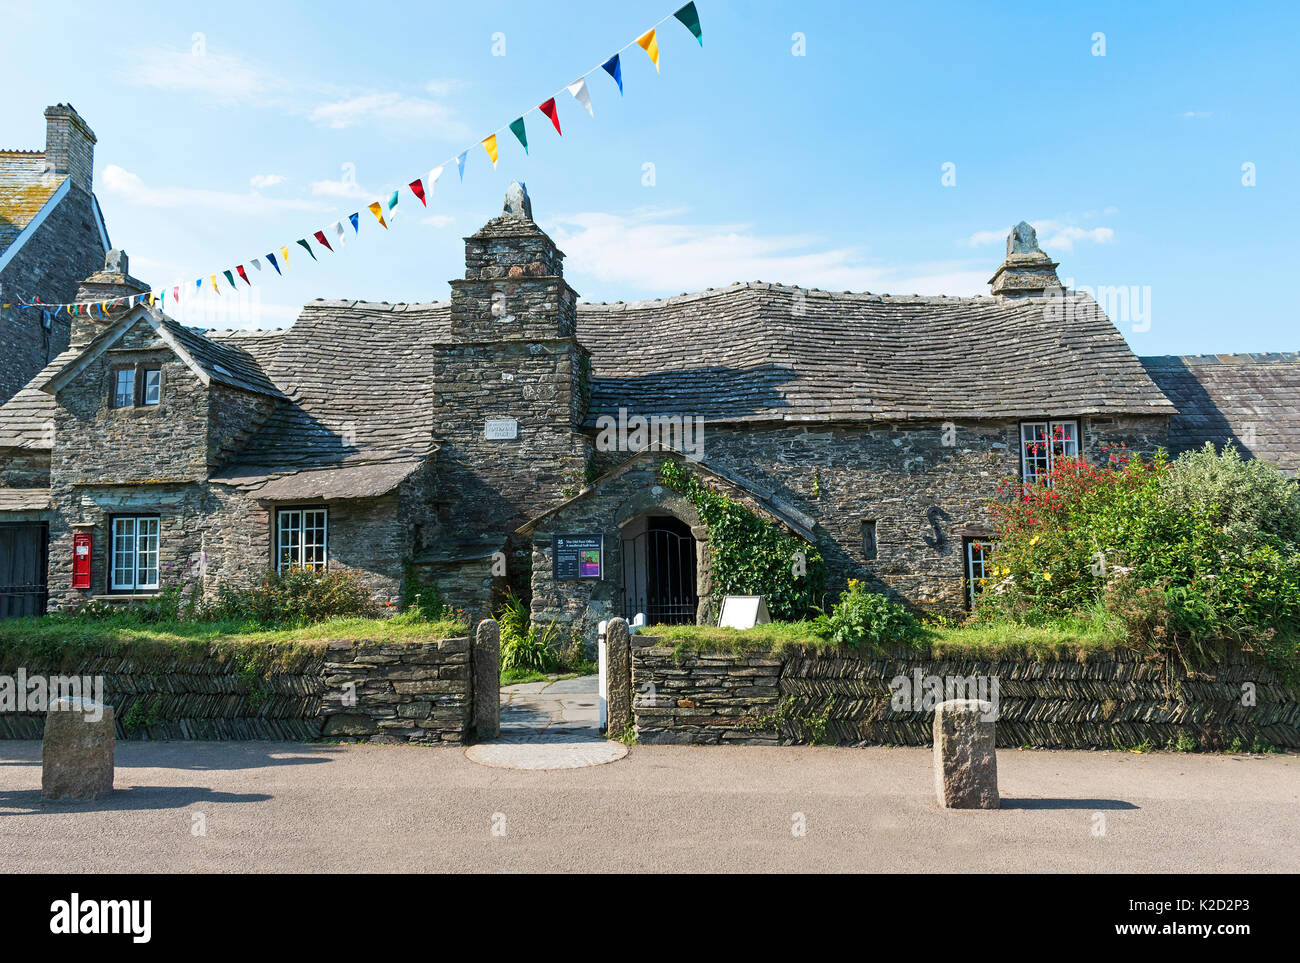 the old post office 14th century,building in tintagel, cornwall, england, britain, uk, Stock Photo